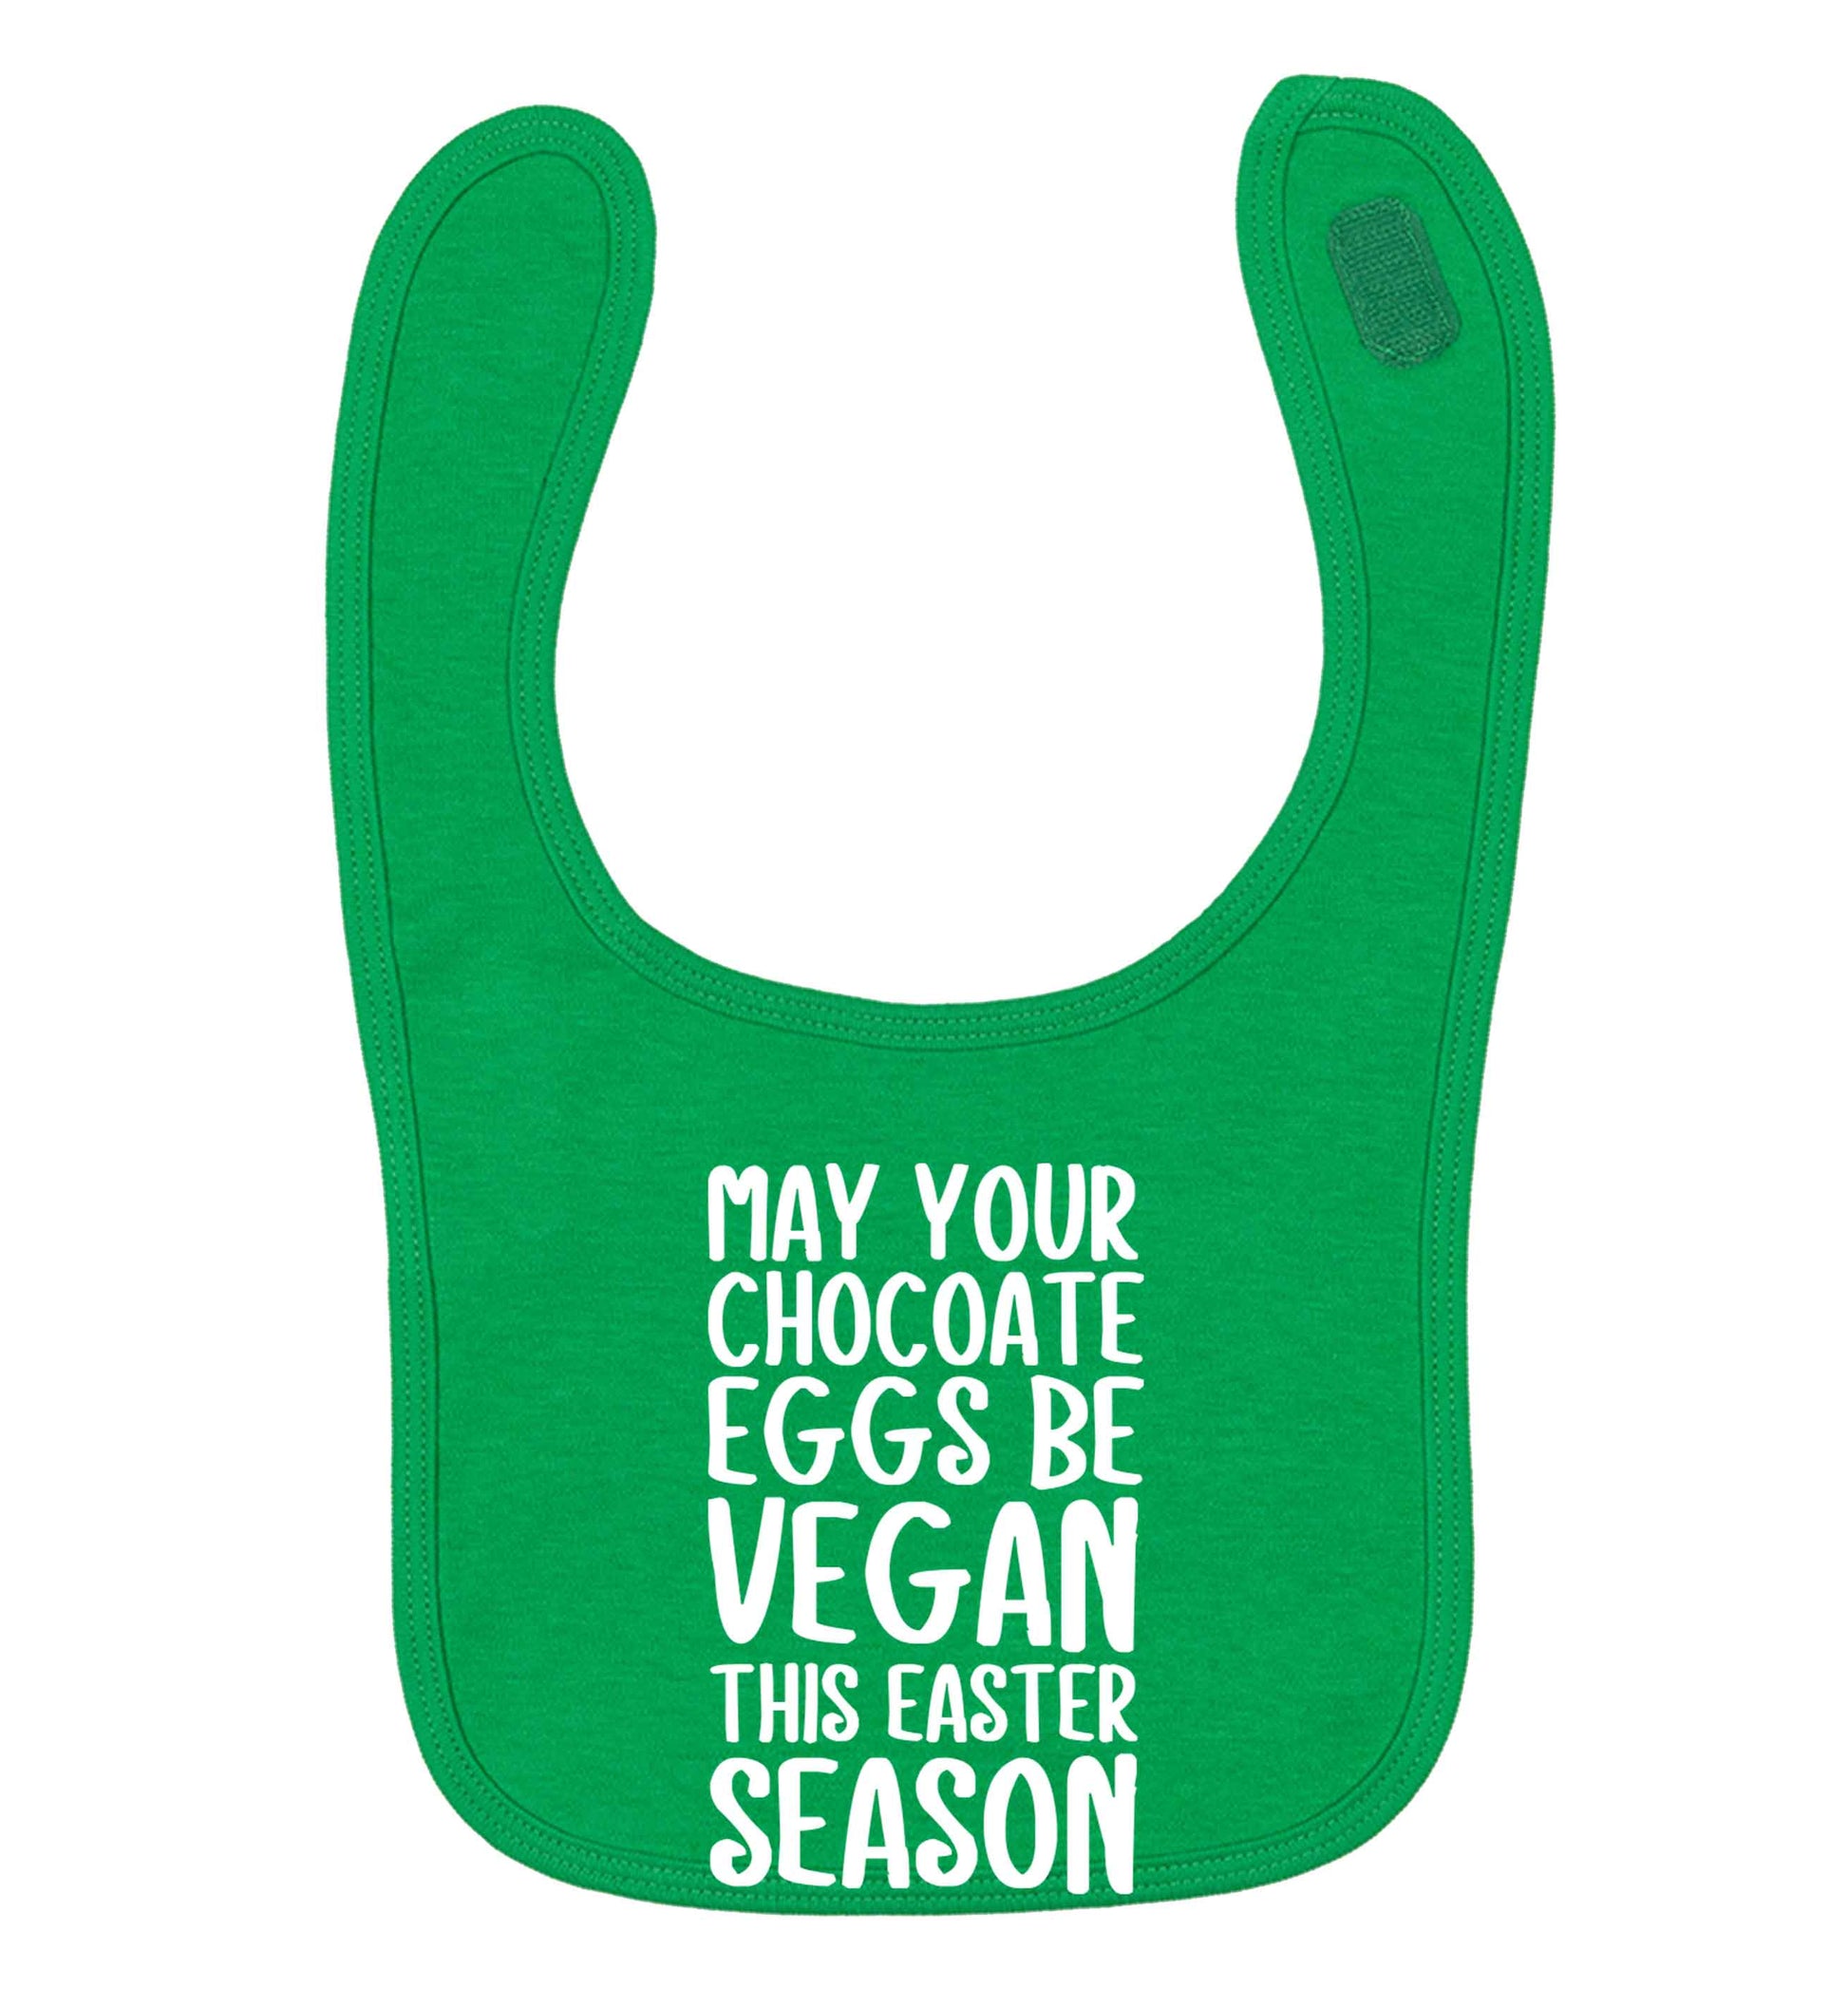 Easter bunny approved! Vegans will love this easter themed green baby bib